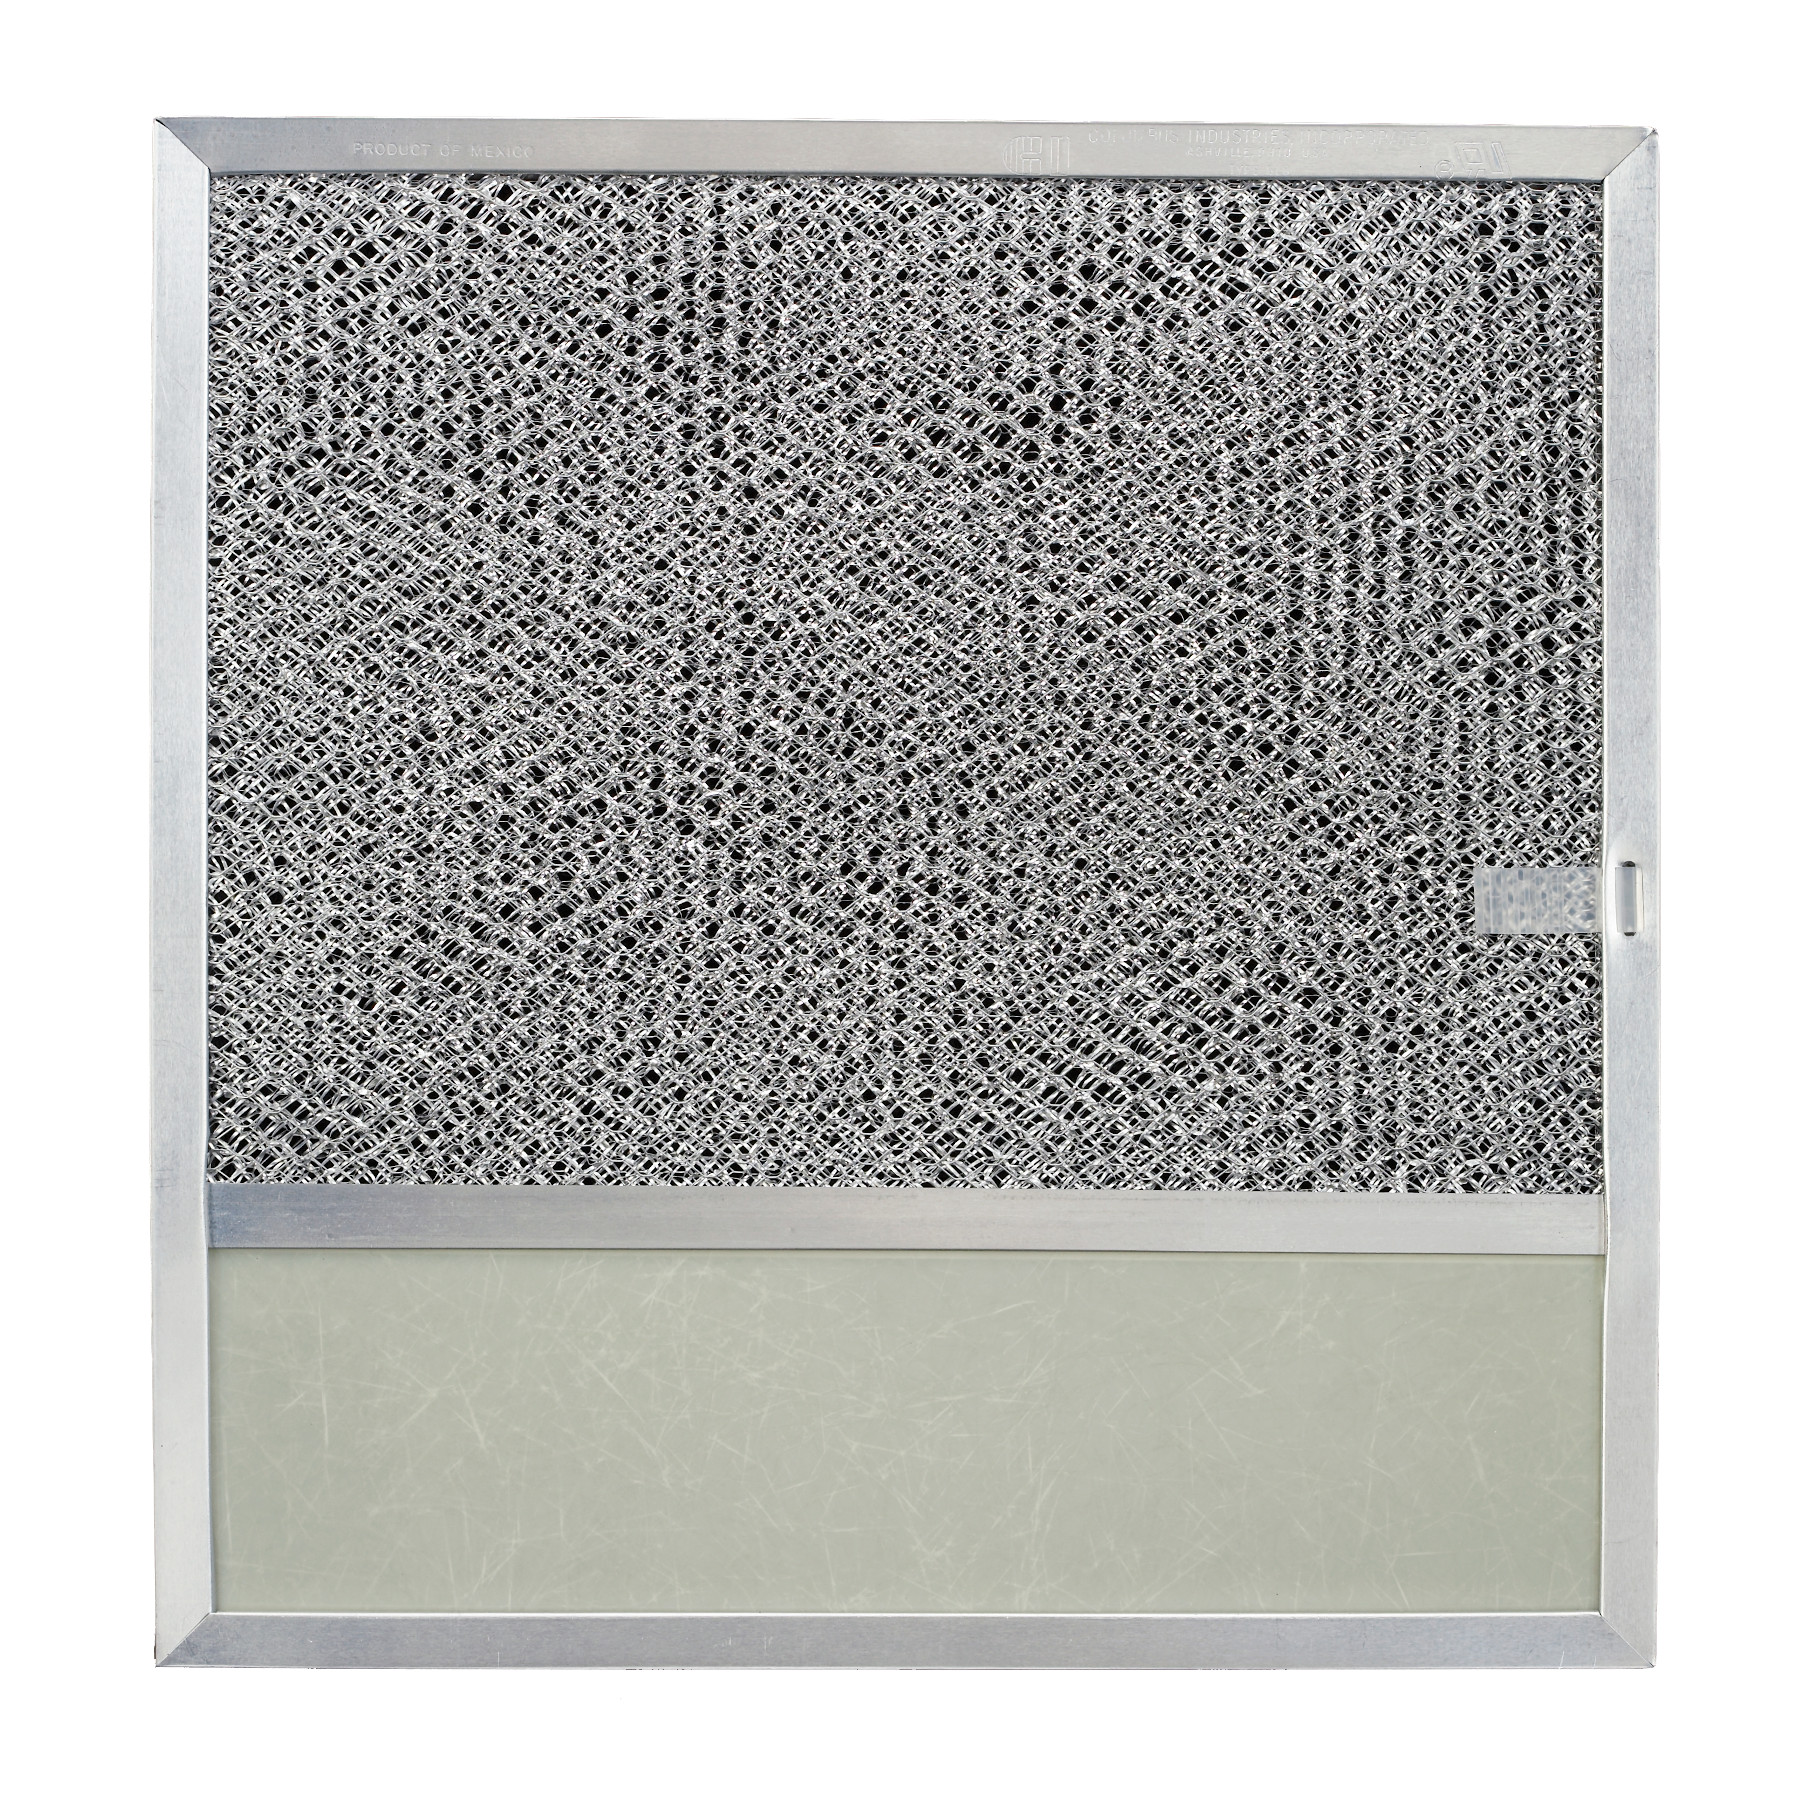 Broan-NuTone® Genuine Replacement Aluminum Filter w/ Light Lens for Range Hoods, 11-7/16" X 11-13/16", Fits Select Model